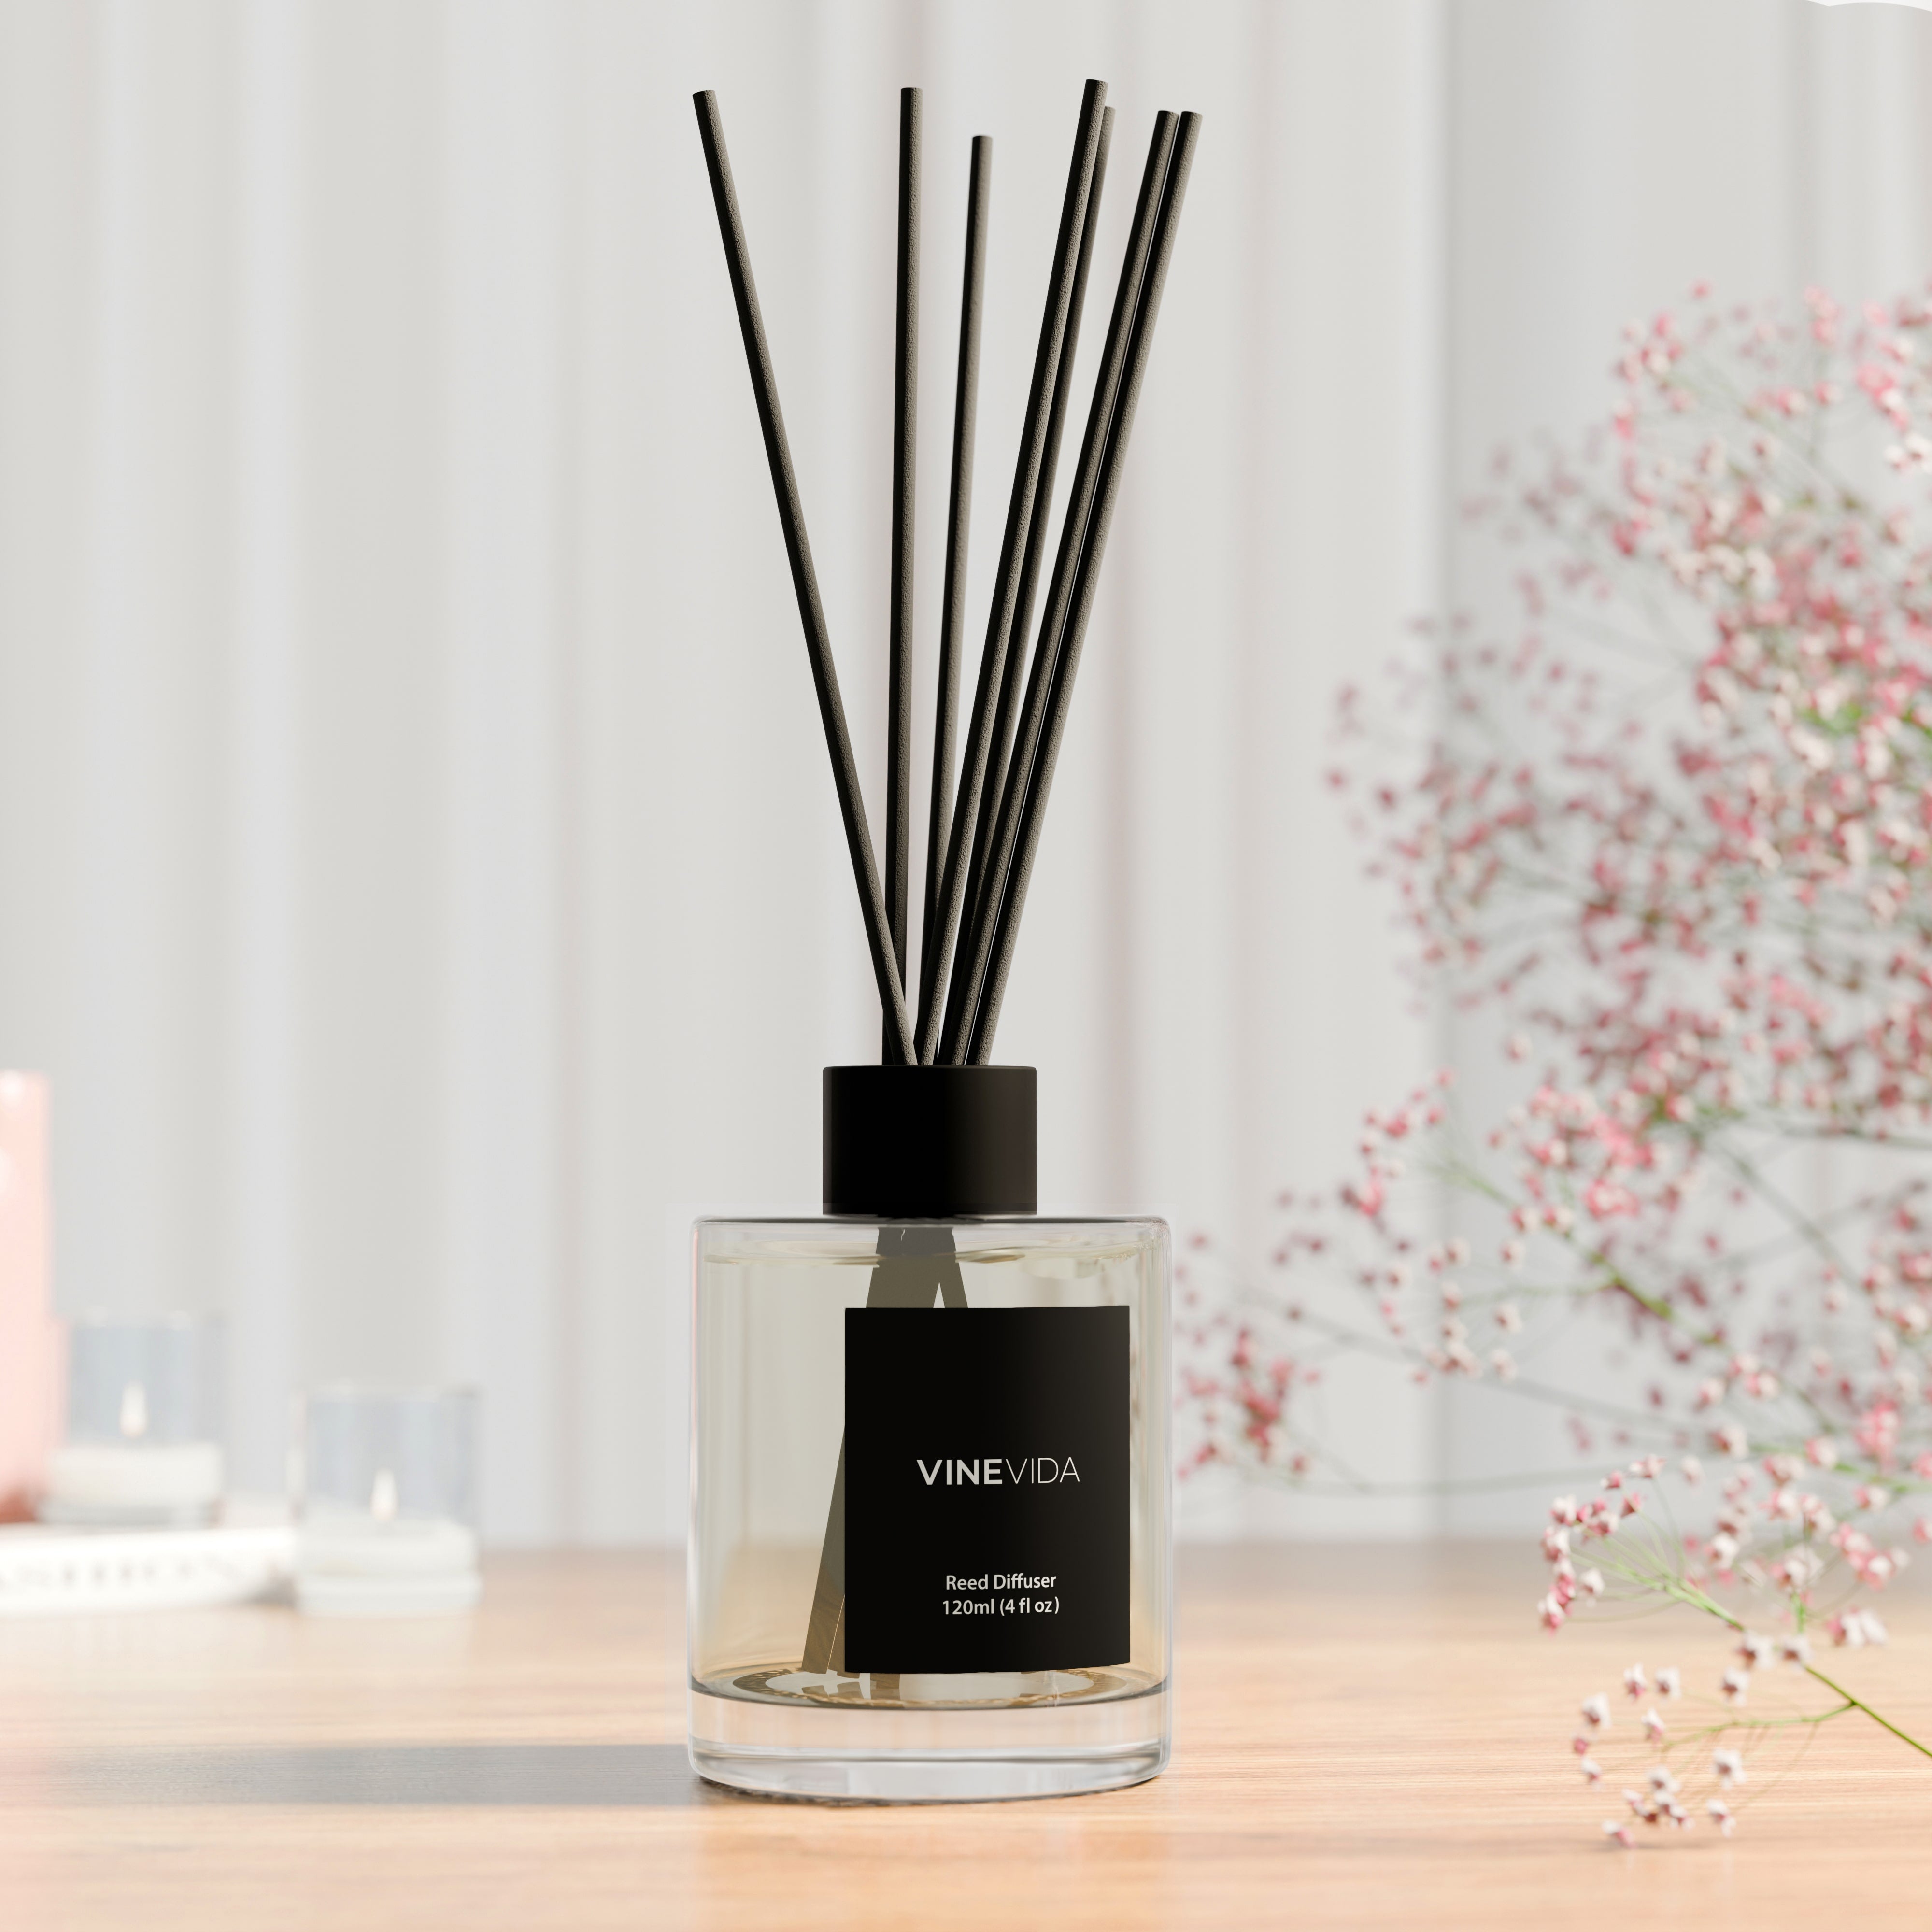 NO. 1401 Reed Diffuser - Inspired by: Black Tulip by Nest